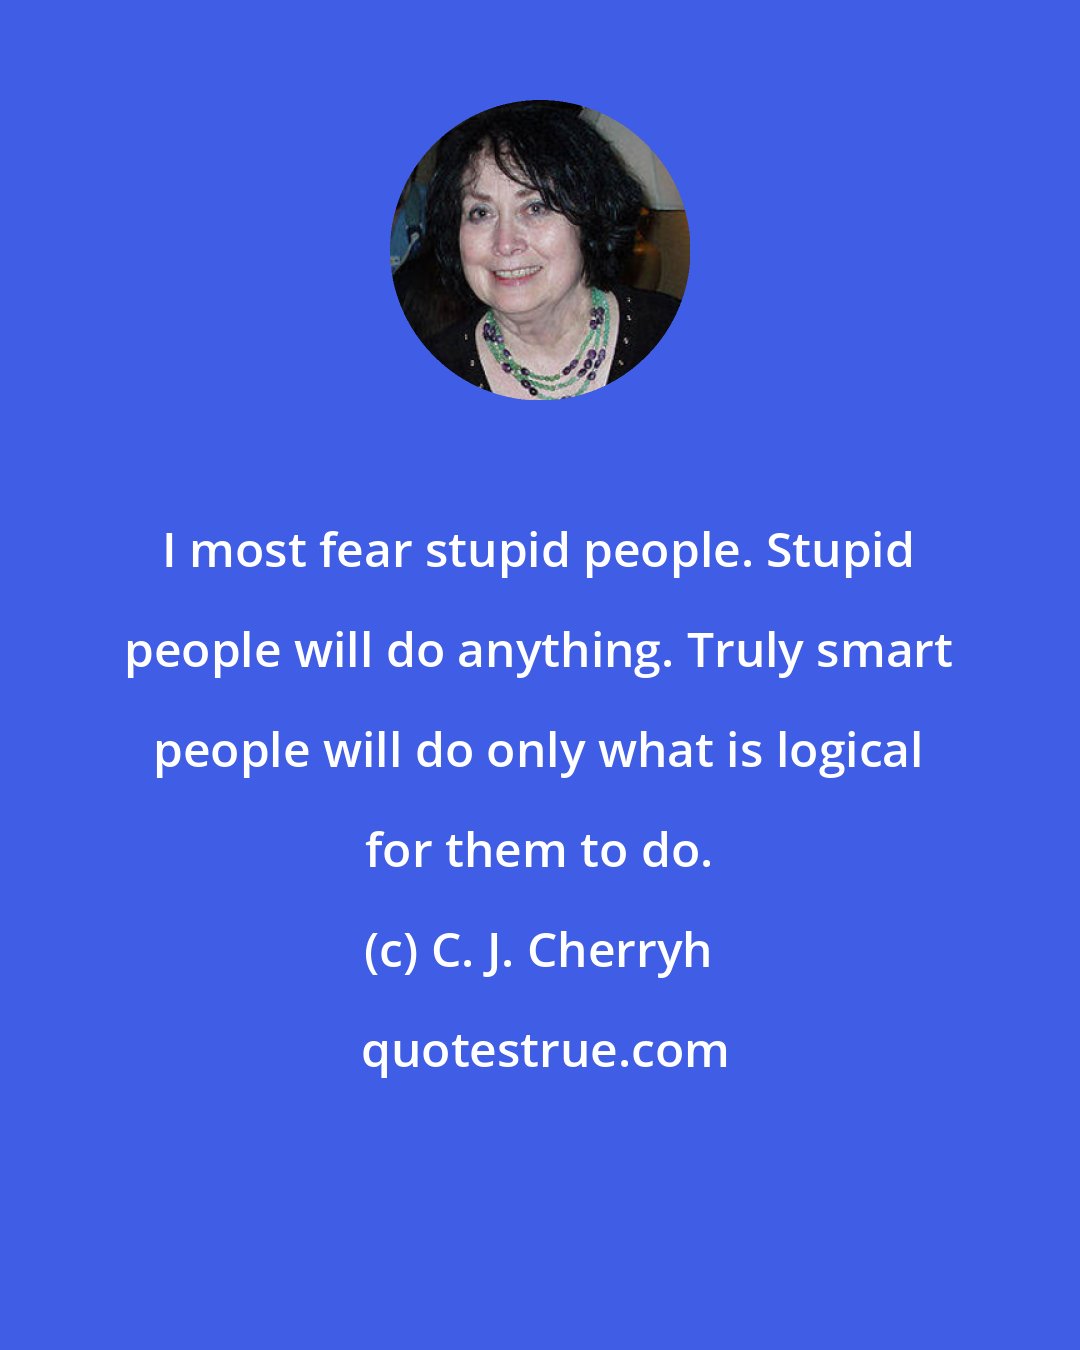 C. J. Cherryh: I most fear stupid people. Stupid people will do anything. Truly smart people will do only what is logical for them to do.